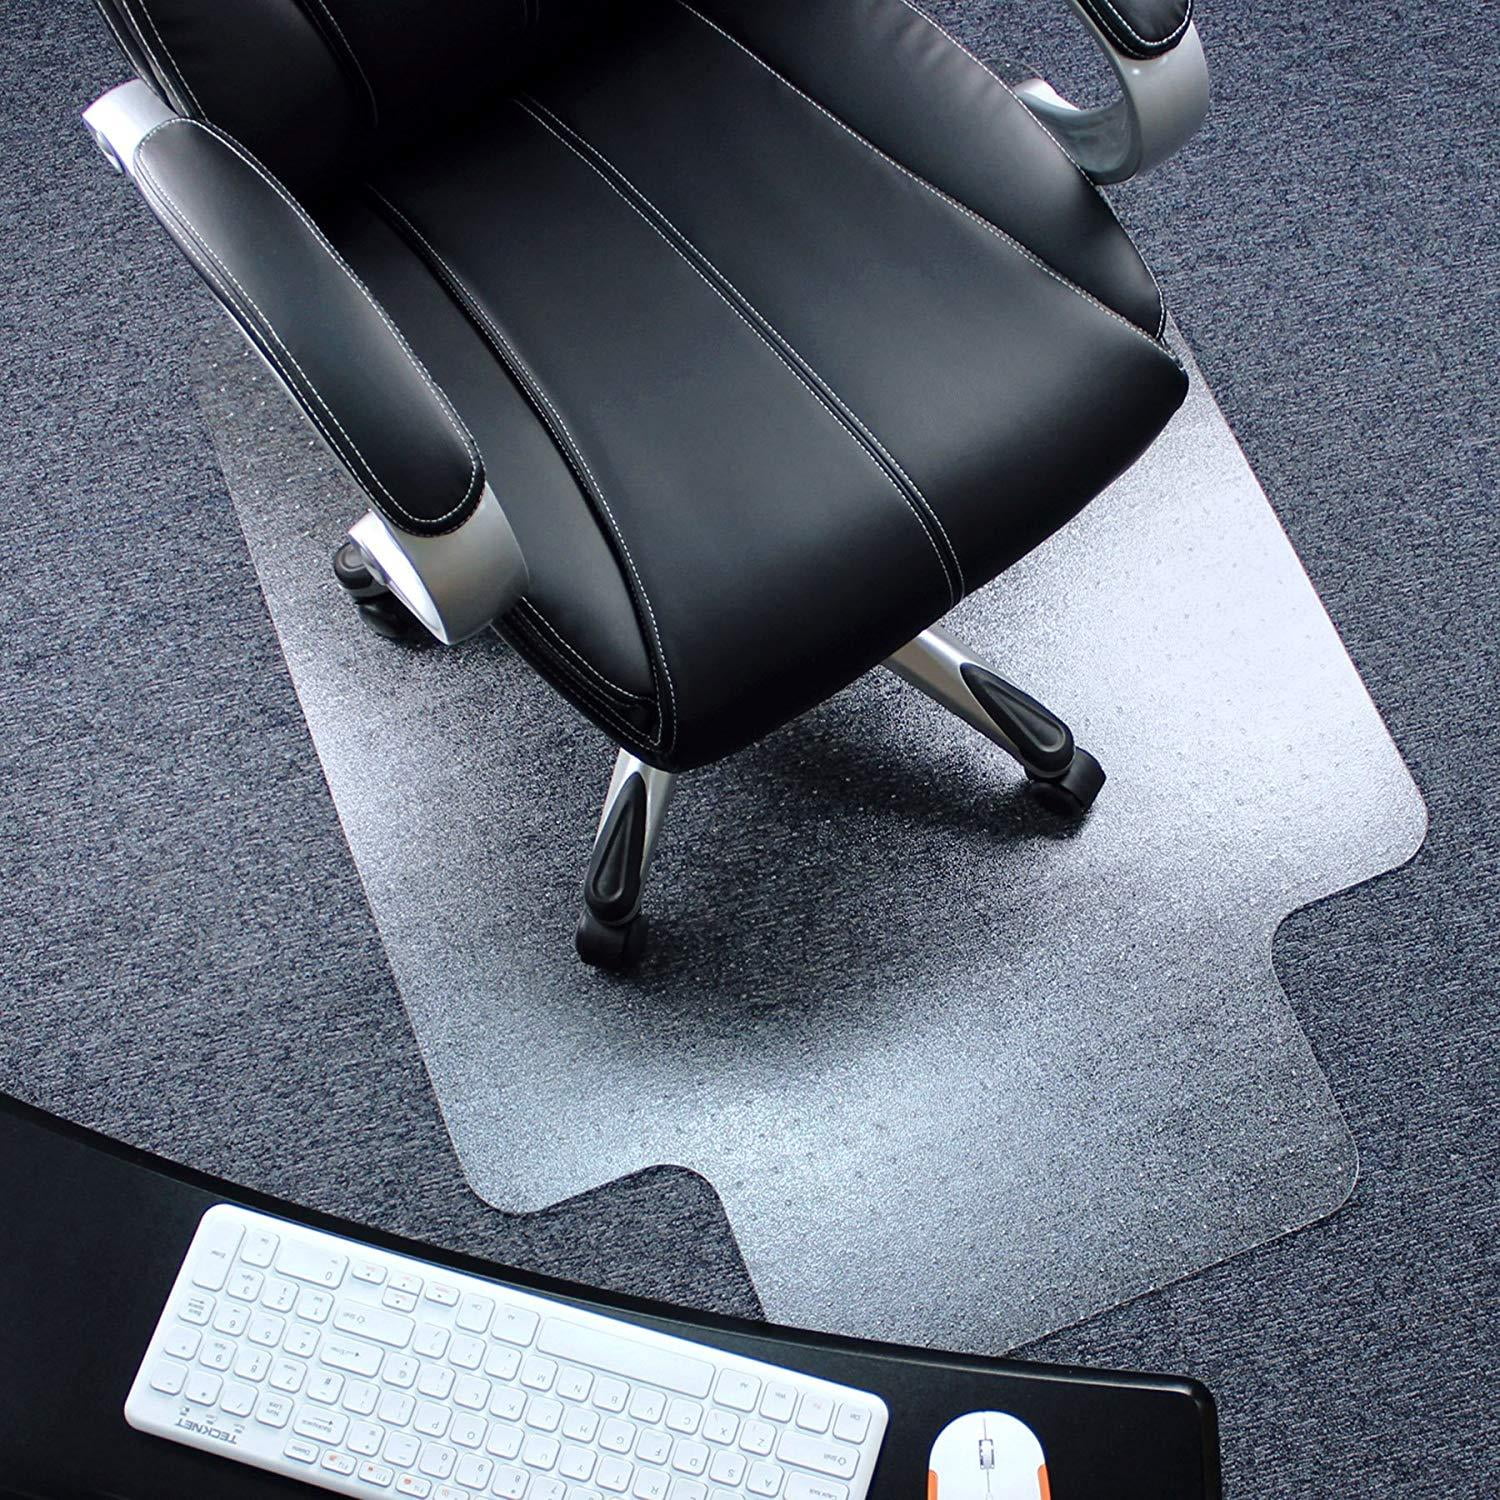 36" x 48" Home Office Chair PVC Floor Mat Studded Back with Lip for Pile Carpet 